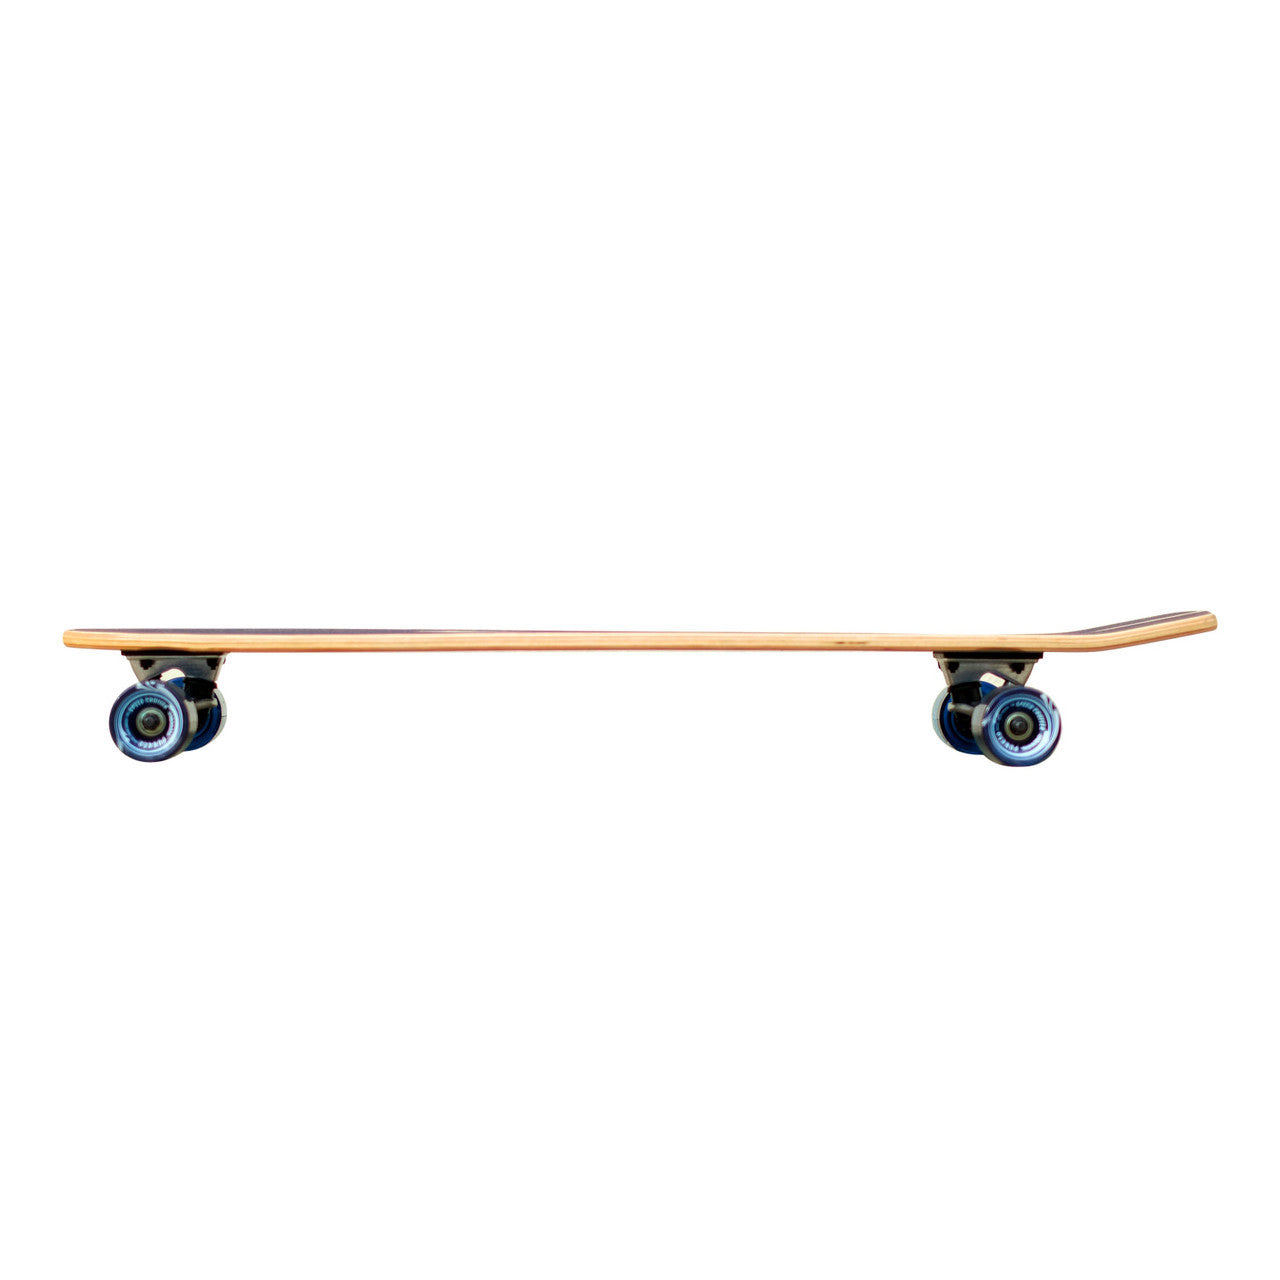 Yocaher Slimkick Longboard Complete - Stained Blue